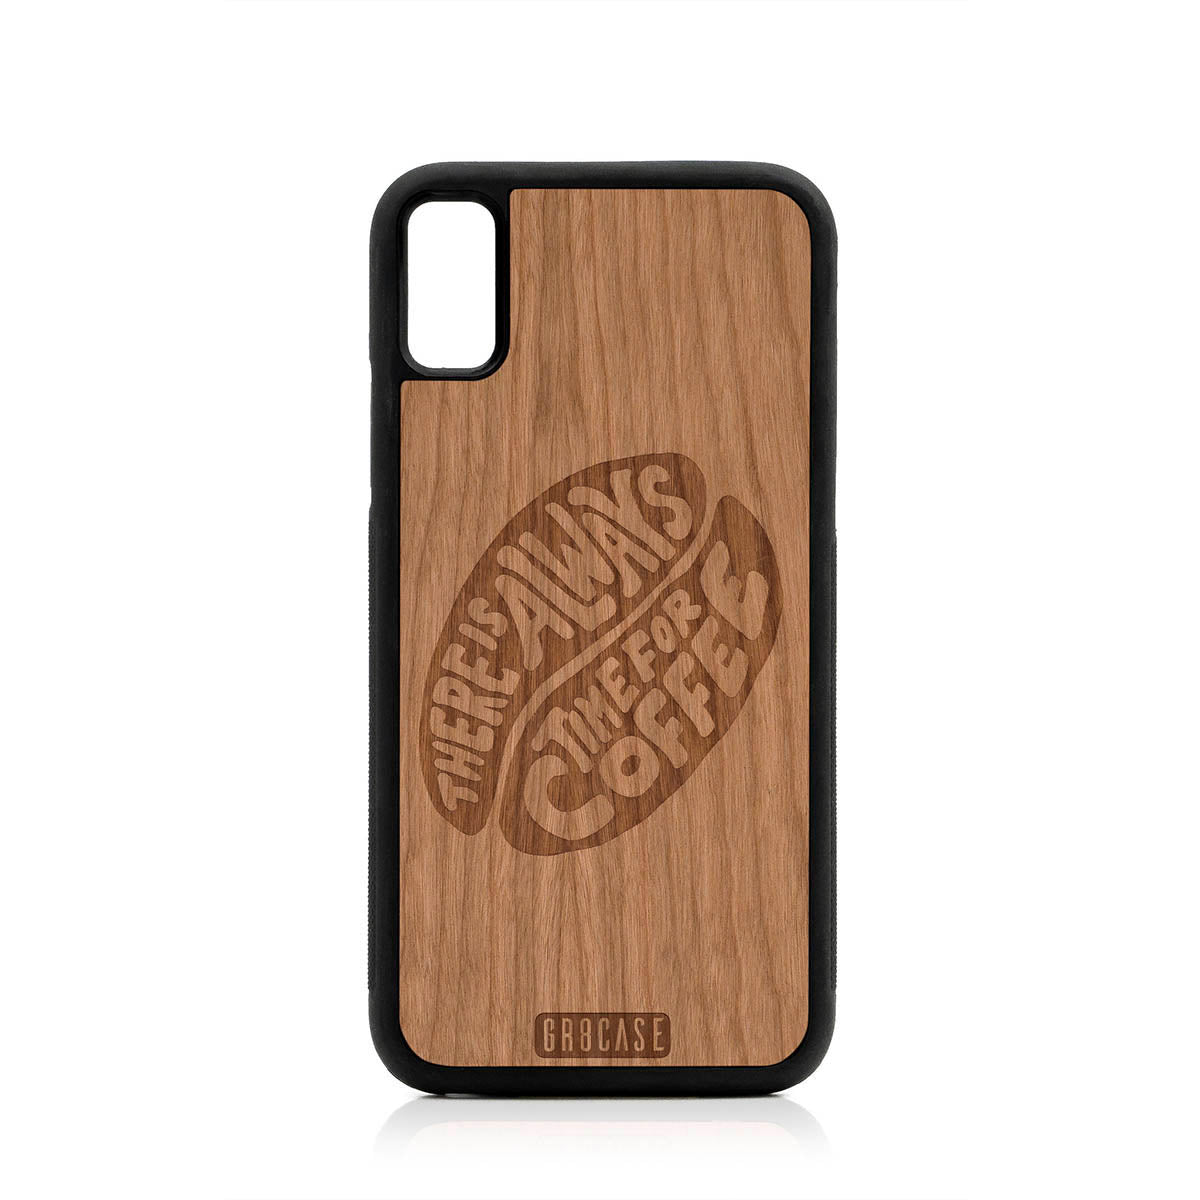 There Is Always Time For Coffee  Design Wood Case For iPhone XR